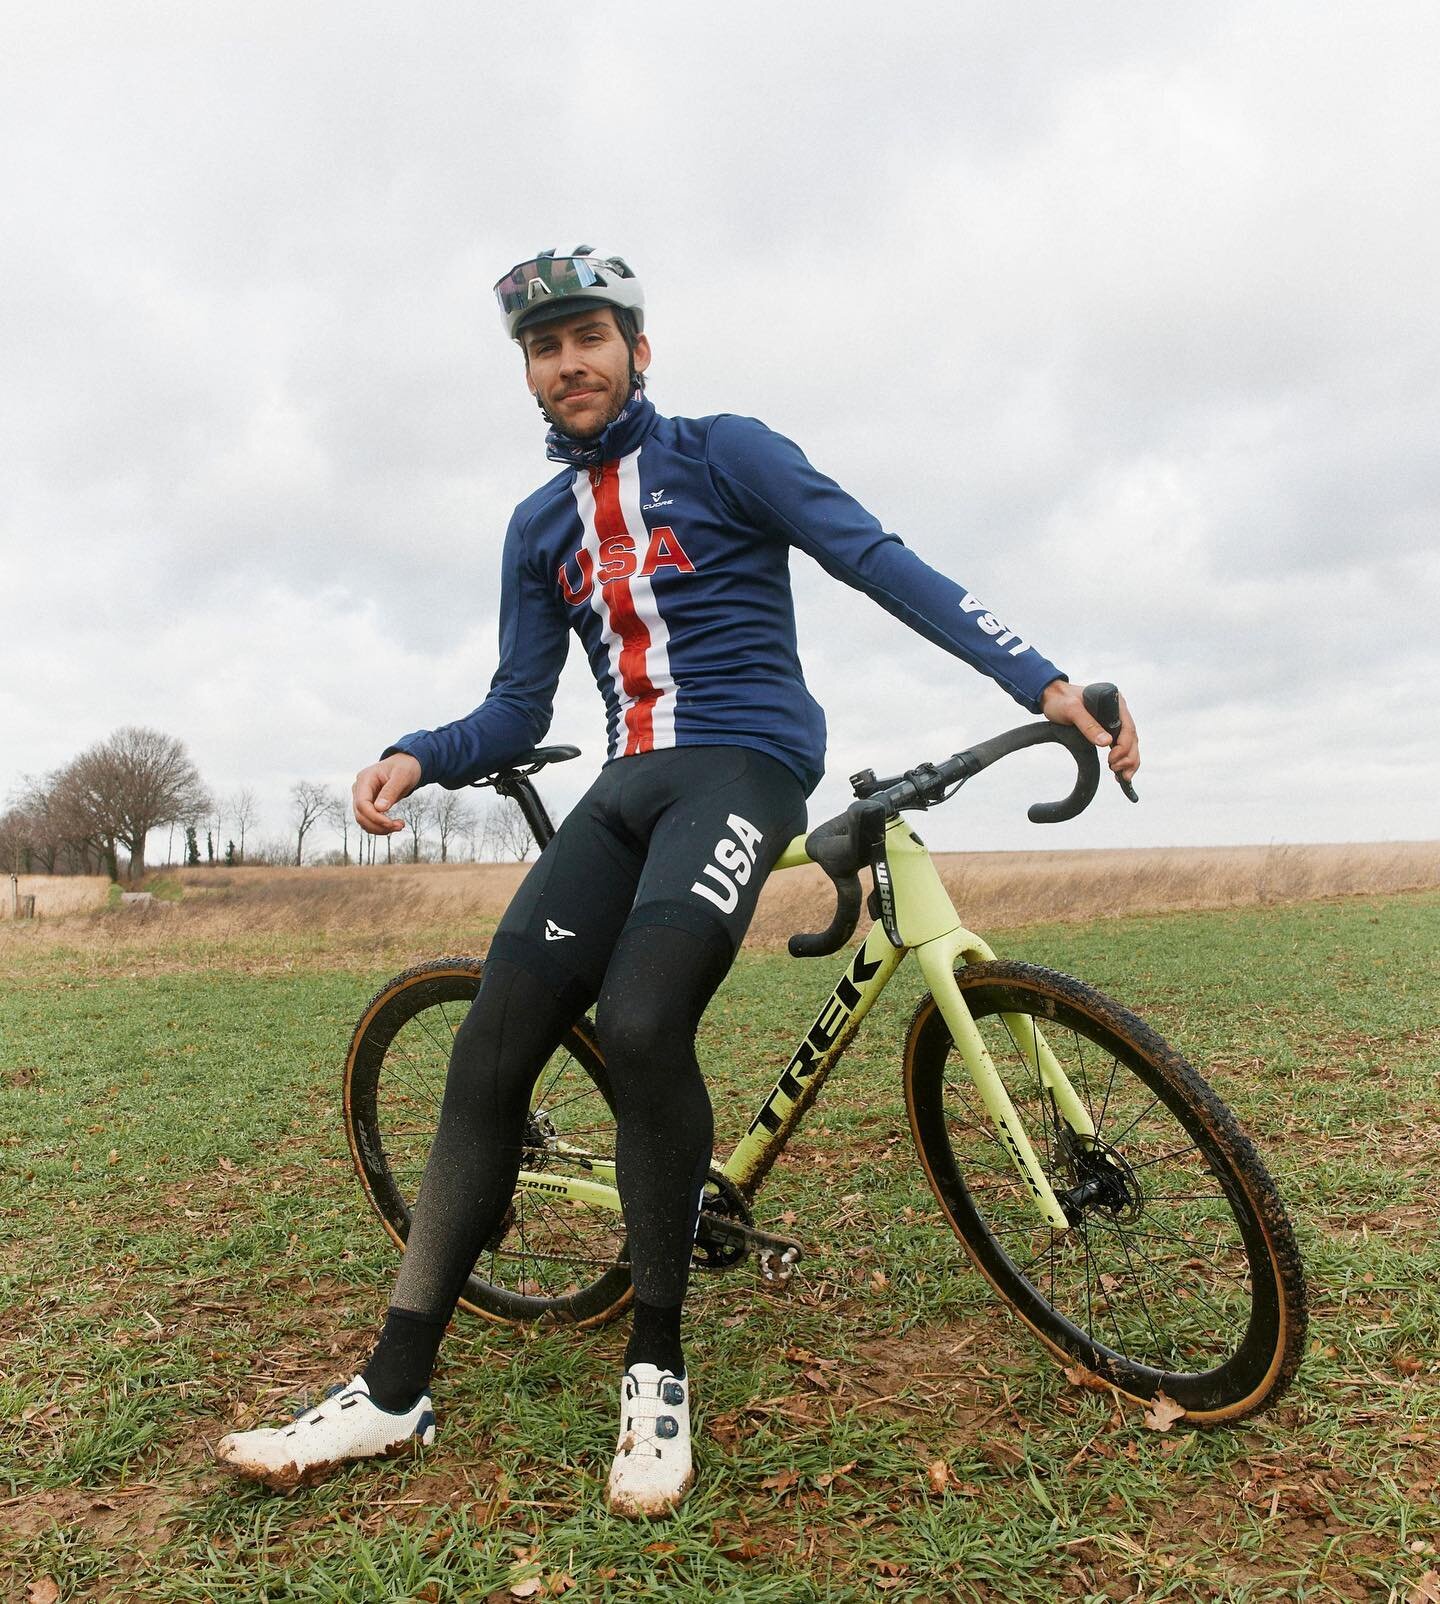 This weekend in Hoogerheide 🇳🇱 will be my 10th time representing my country 🇺🇸 at the Cyclocross World Championships. The hard work is done, now it&rsquo;s time to let it rip!

📷: @dominiquepowers 

#WeAreUSACX #cyclocross #USA #MudFund #cx